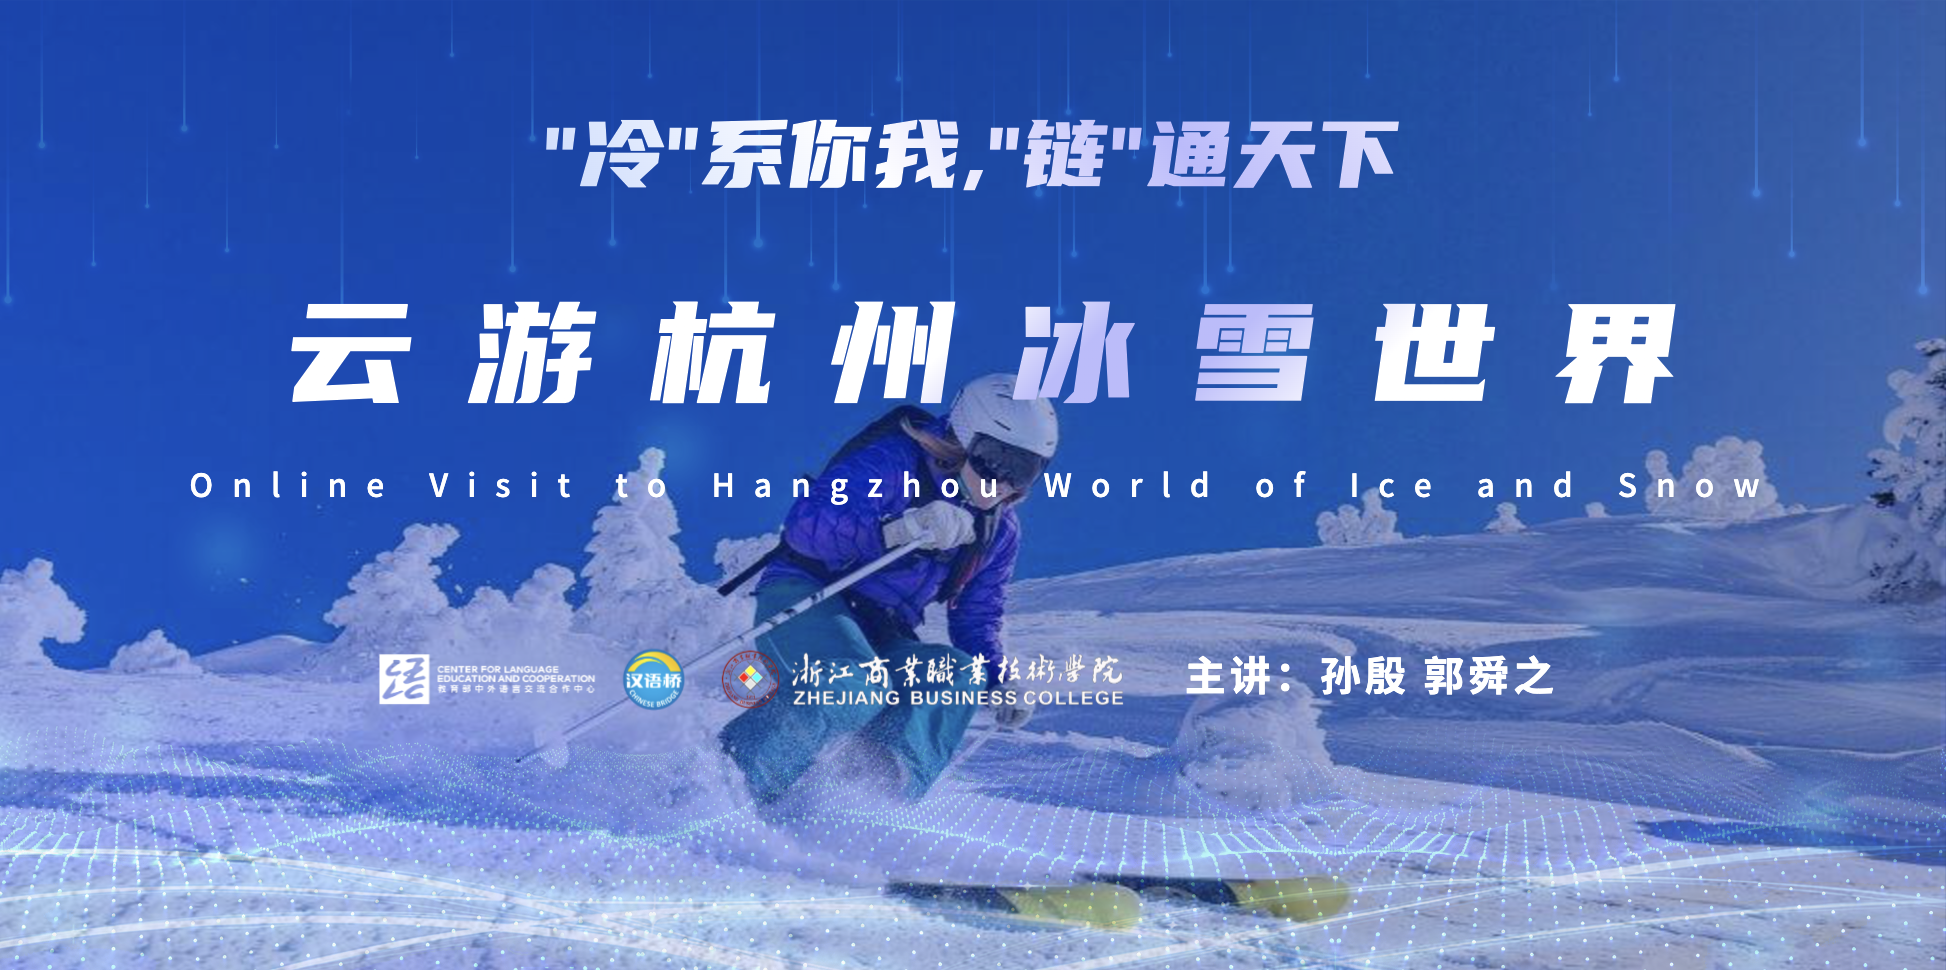 Online Visit to Hangzhou World of Ice and Snow